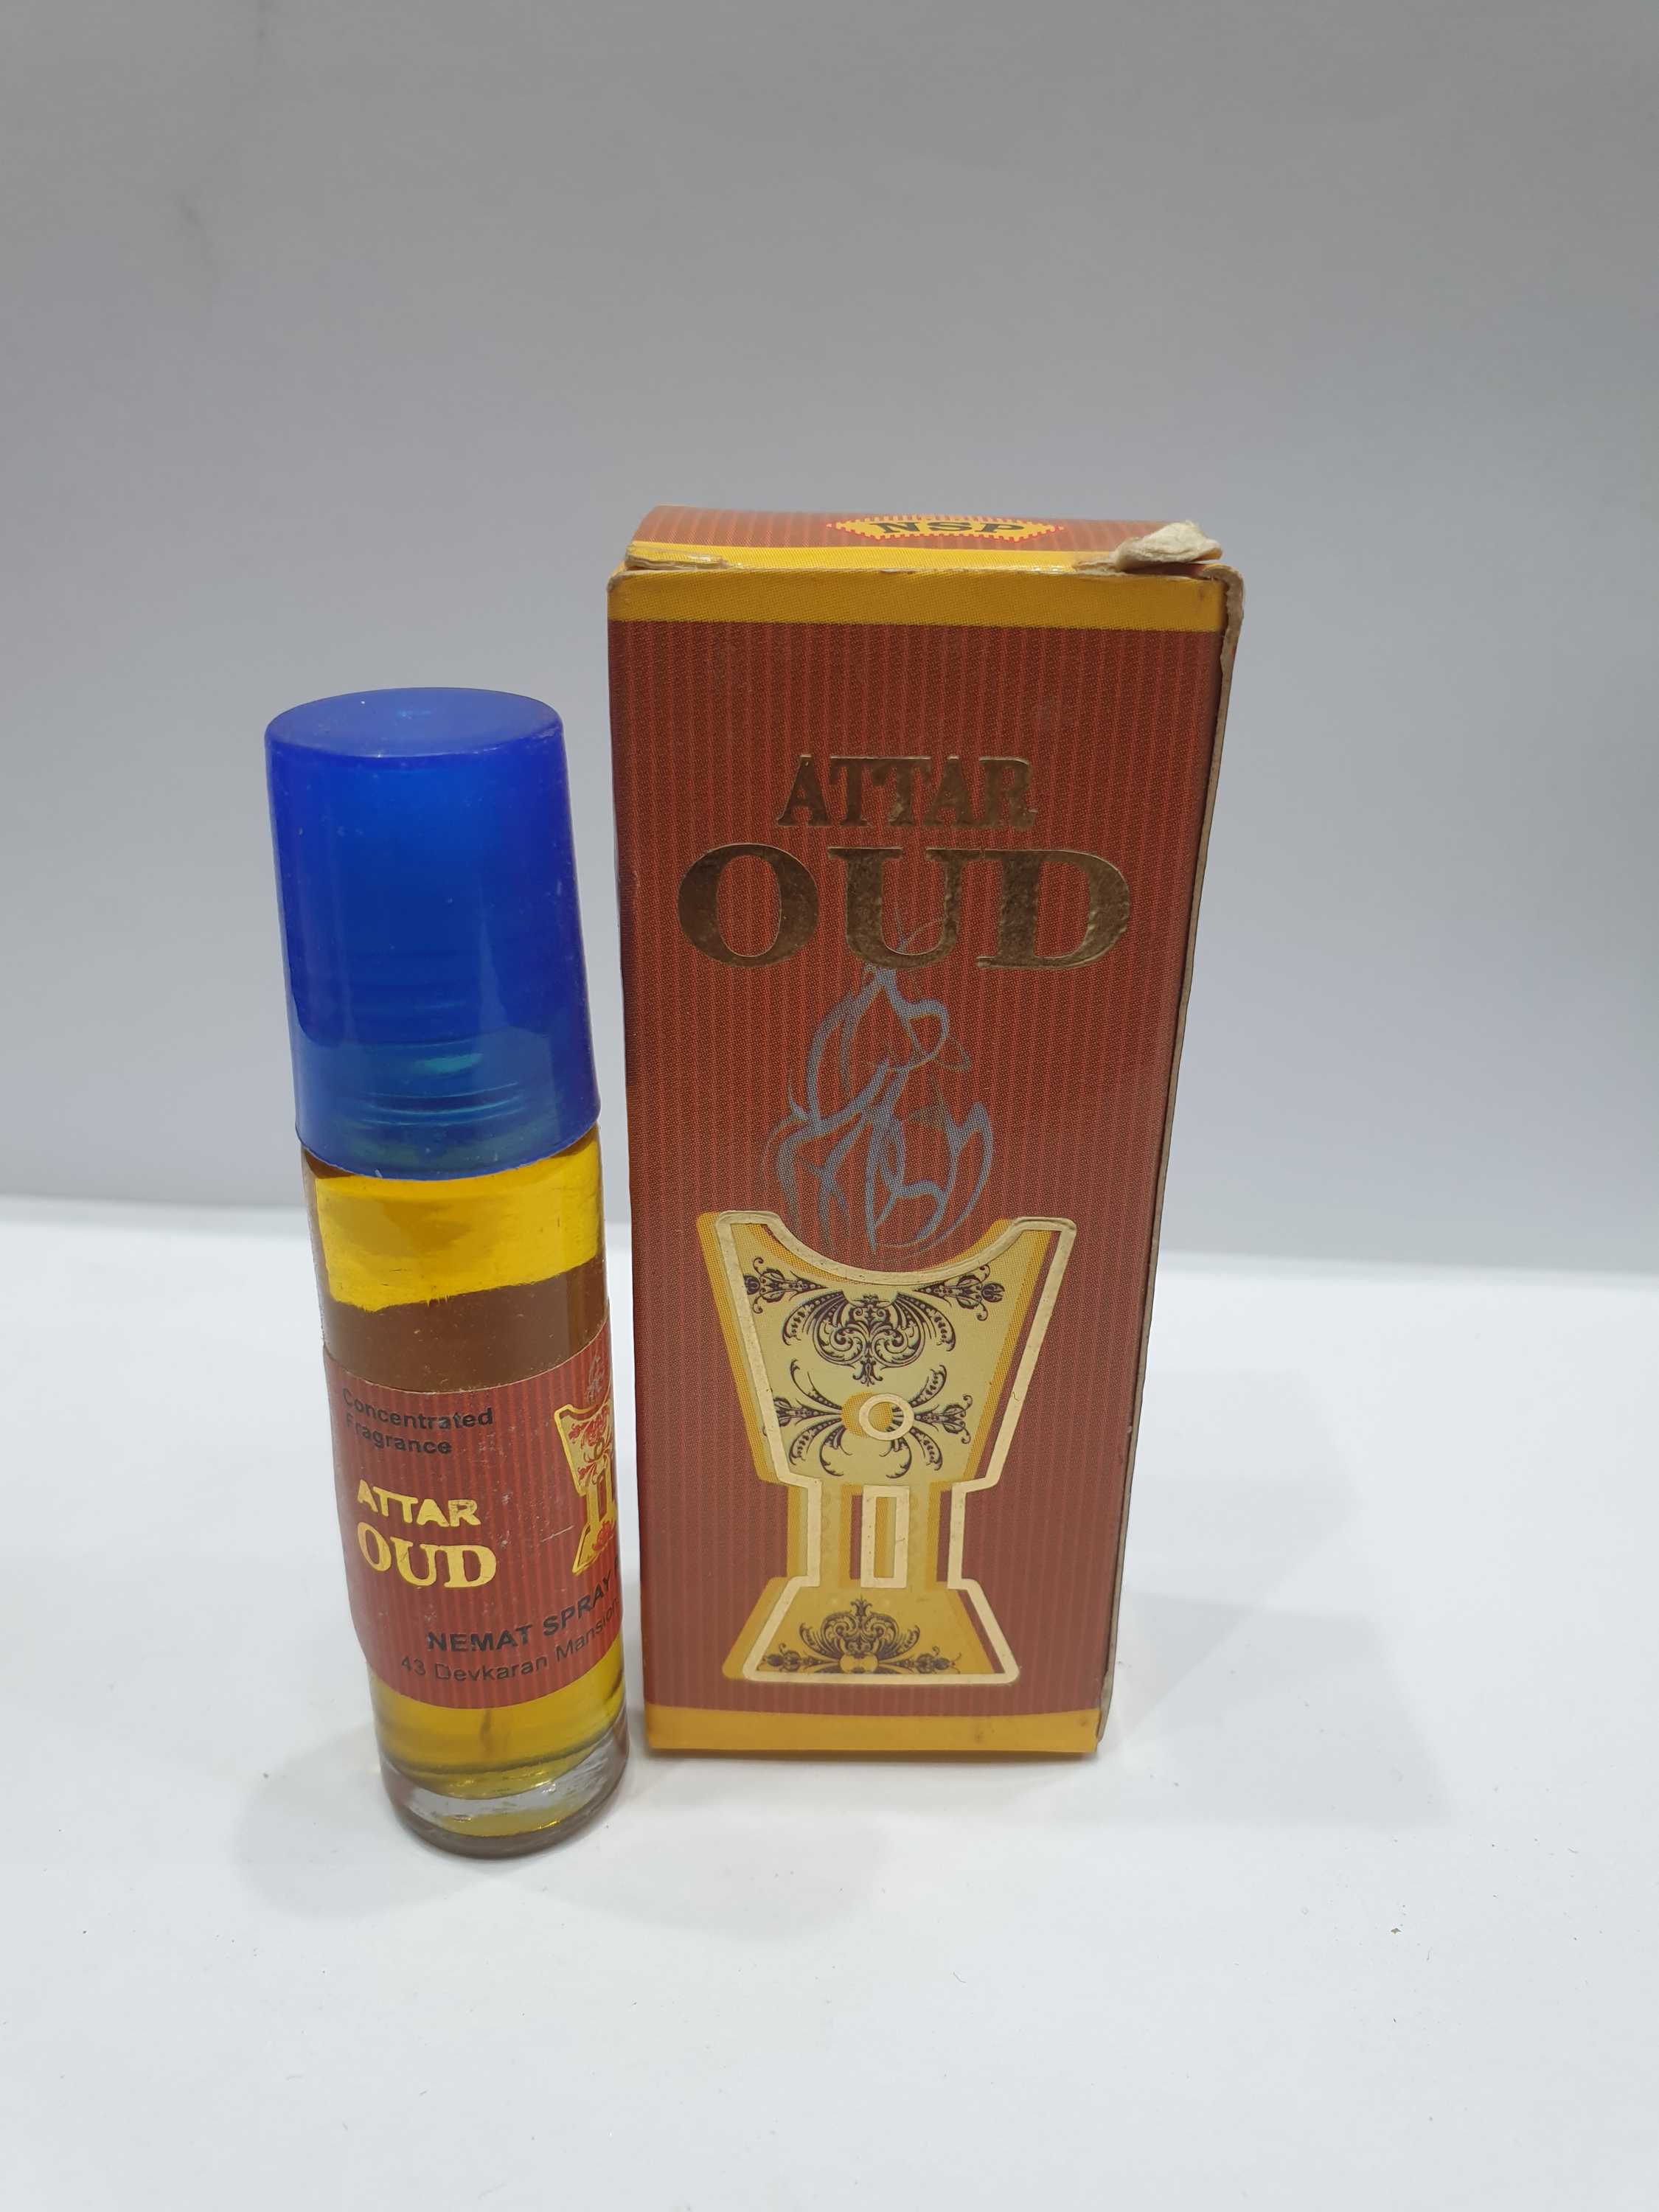 Attar - Handmade Natural Perfume Form Herbal Extract, oud, 6ml, roll On